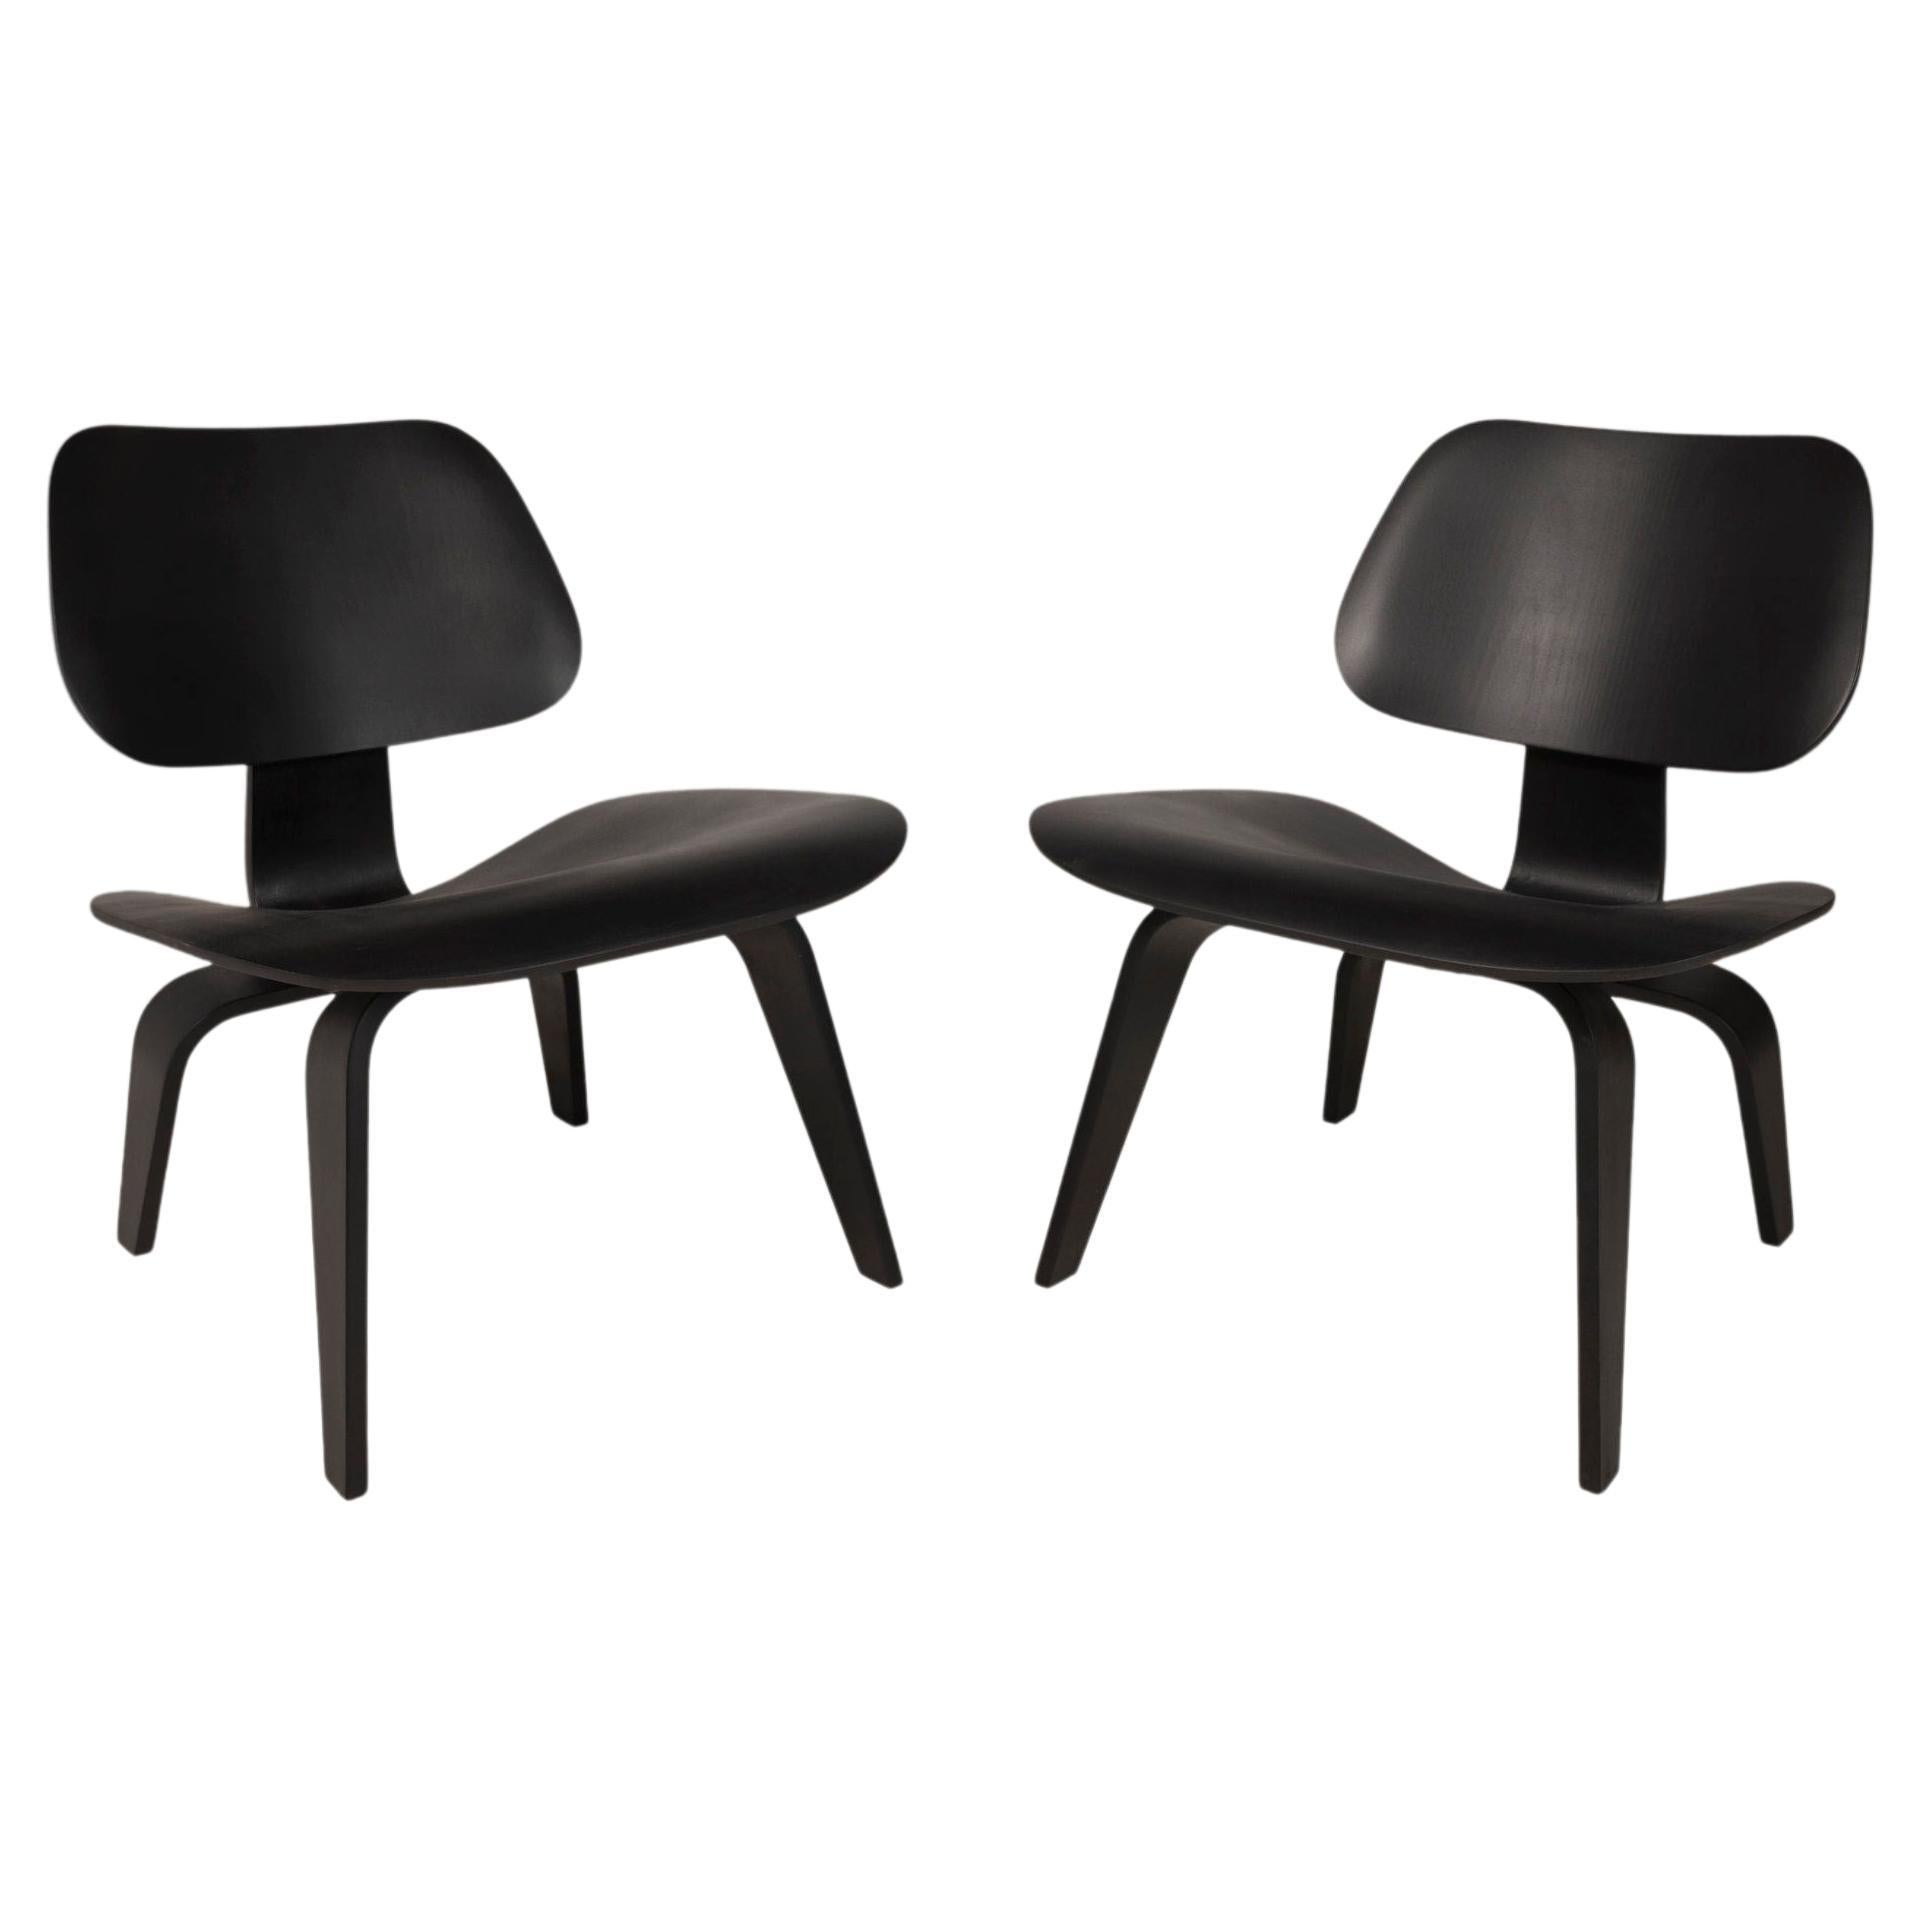 Set of Two '2' Herman Miller LCW Lounge Chairs by Charles & Ray Eames, USA